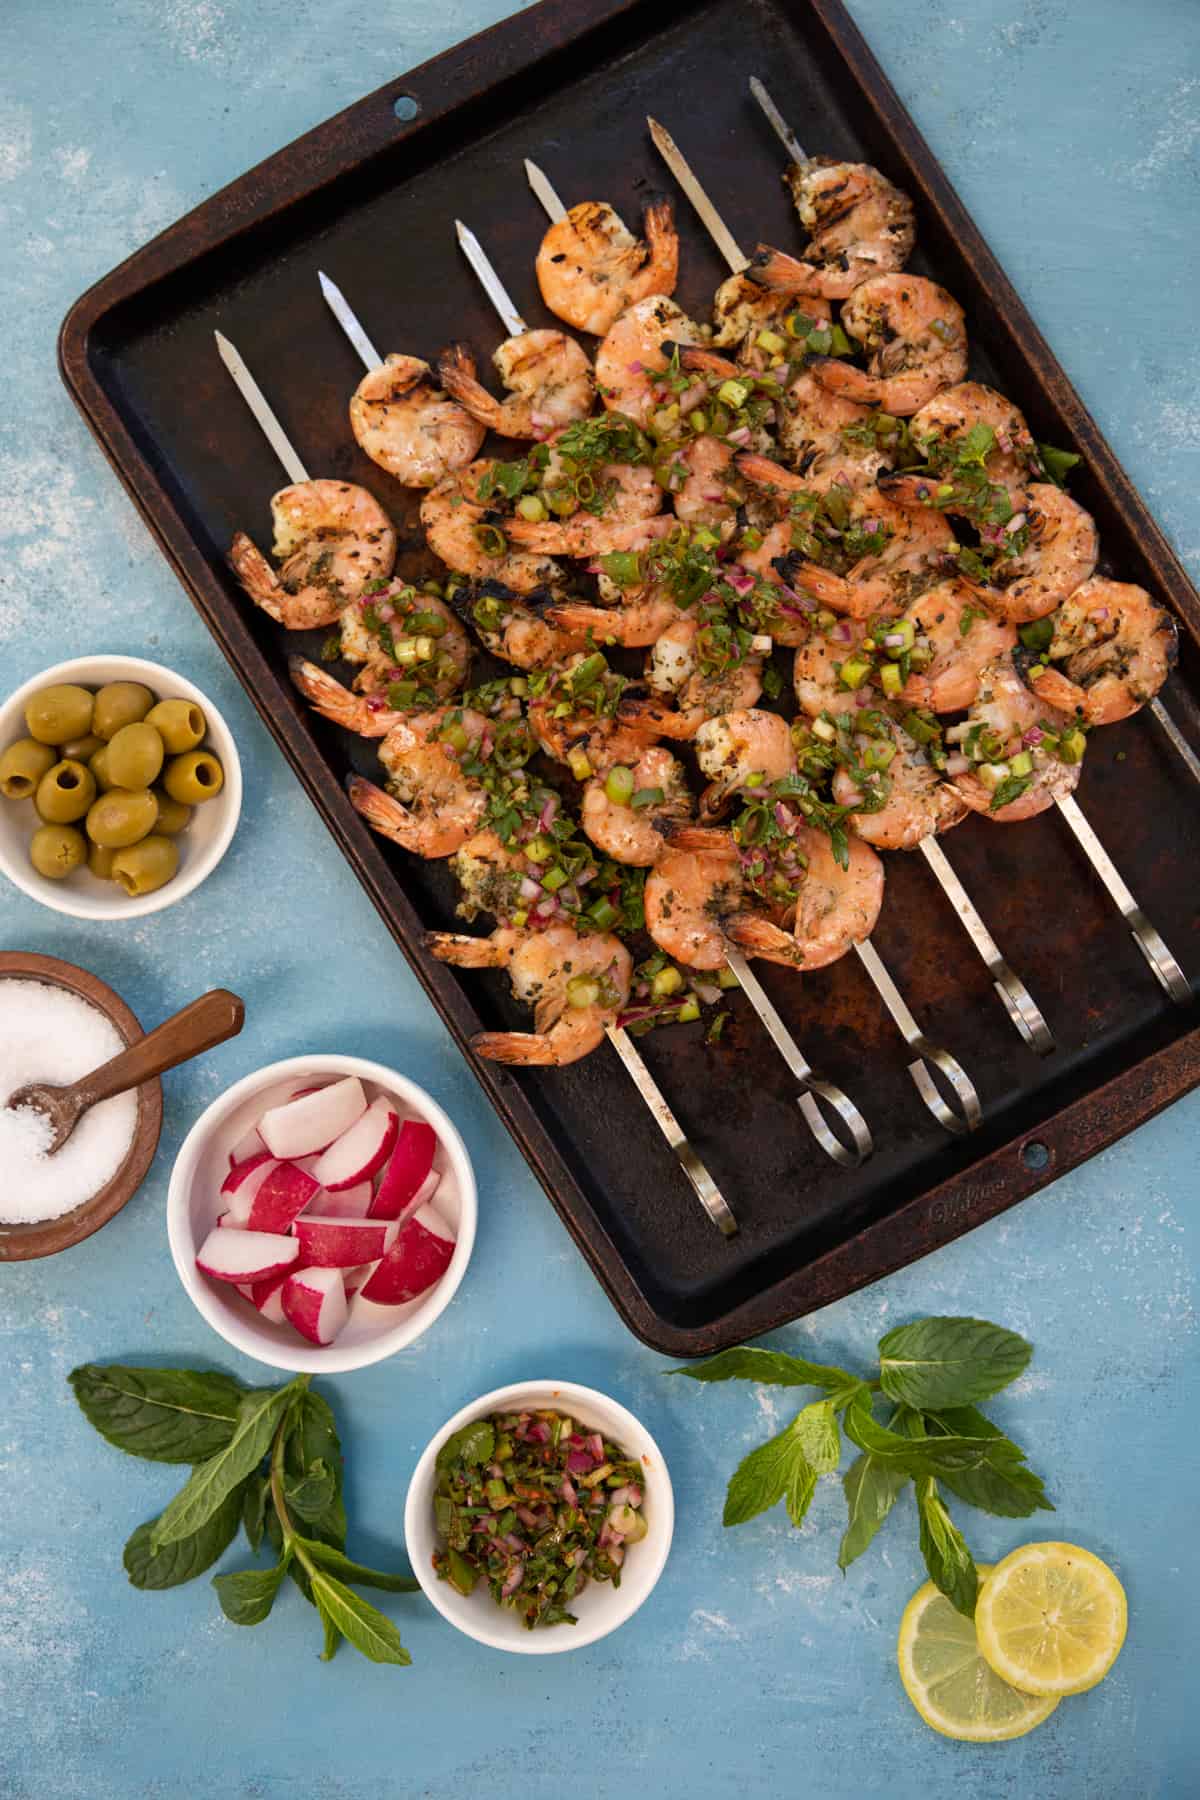 Grilled shrimp skewers are perfect for when you're ready to fire up the grill but find yourself in the mood for seafood. Learn how to make shrimp grilled to perfection, then topped with a zesty lemon herb sauce. Threading the shrimp on the skewers will keep them from falling between the grates, making grilling so much easier.
